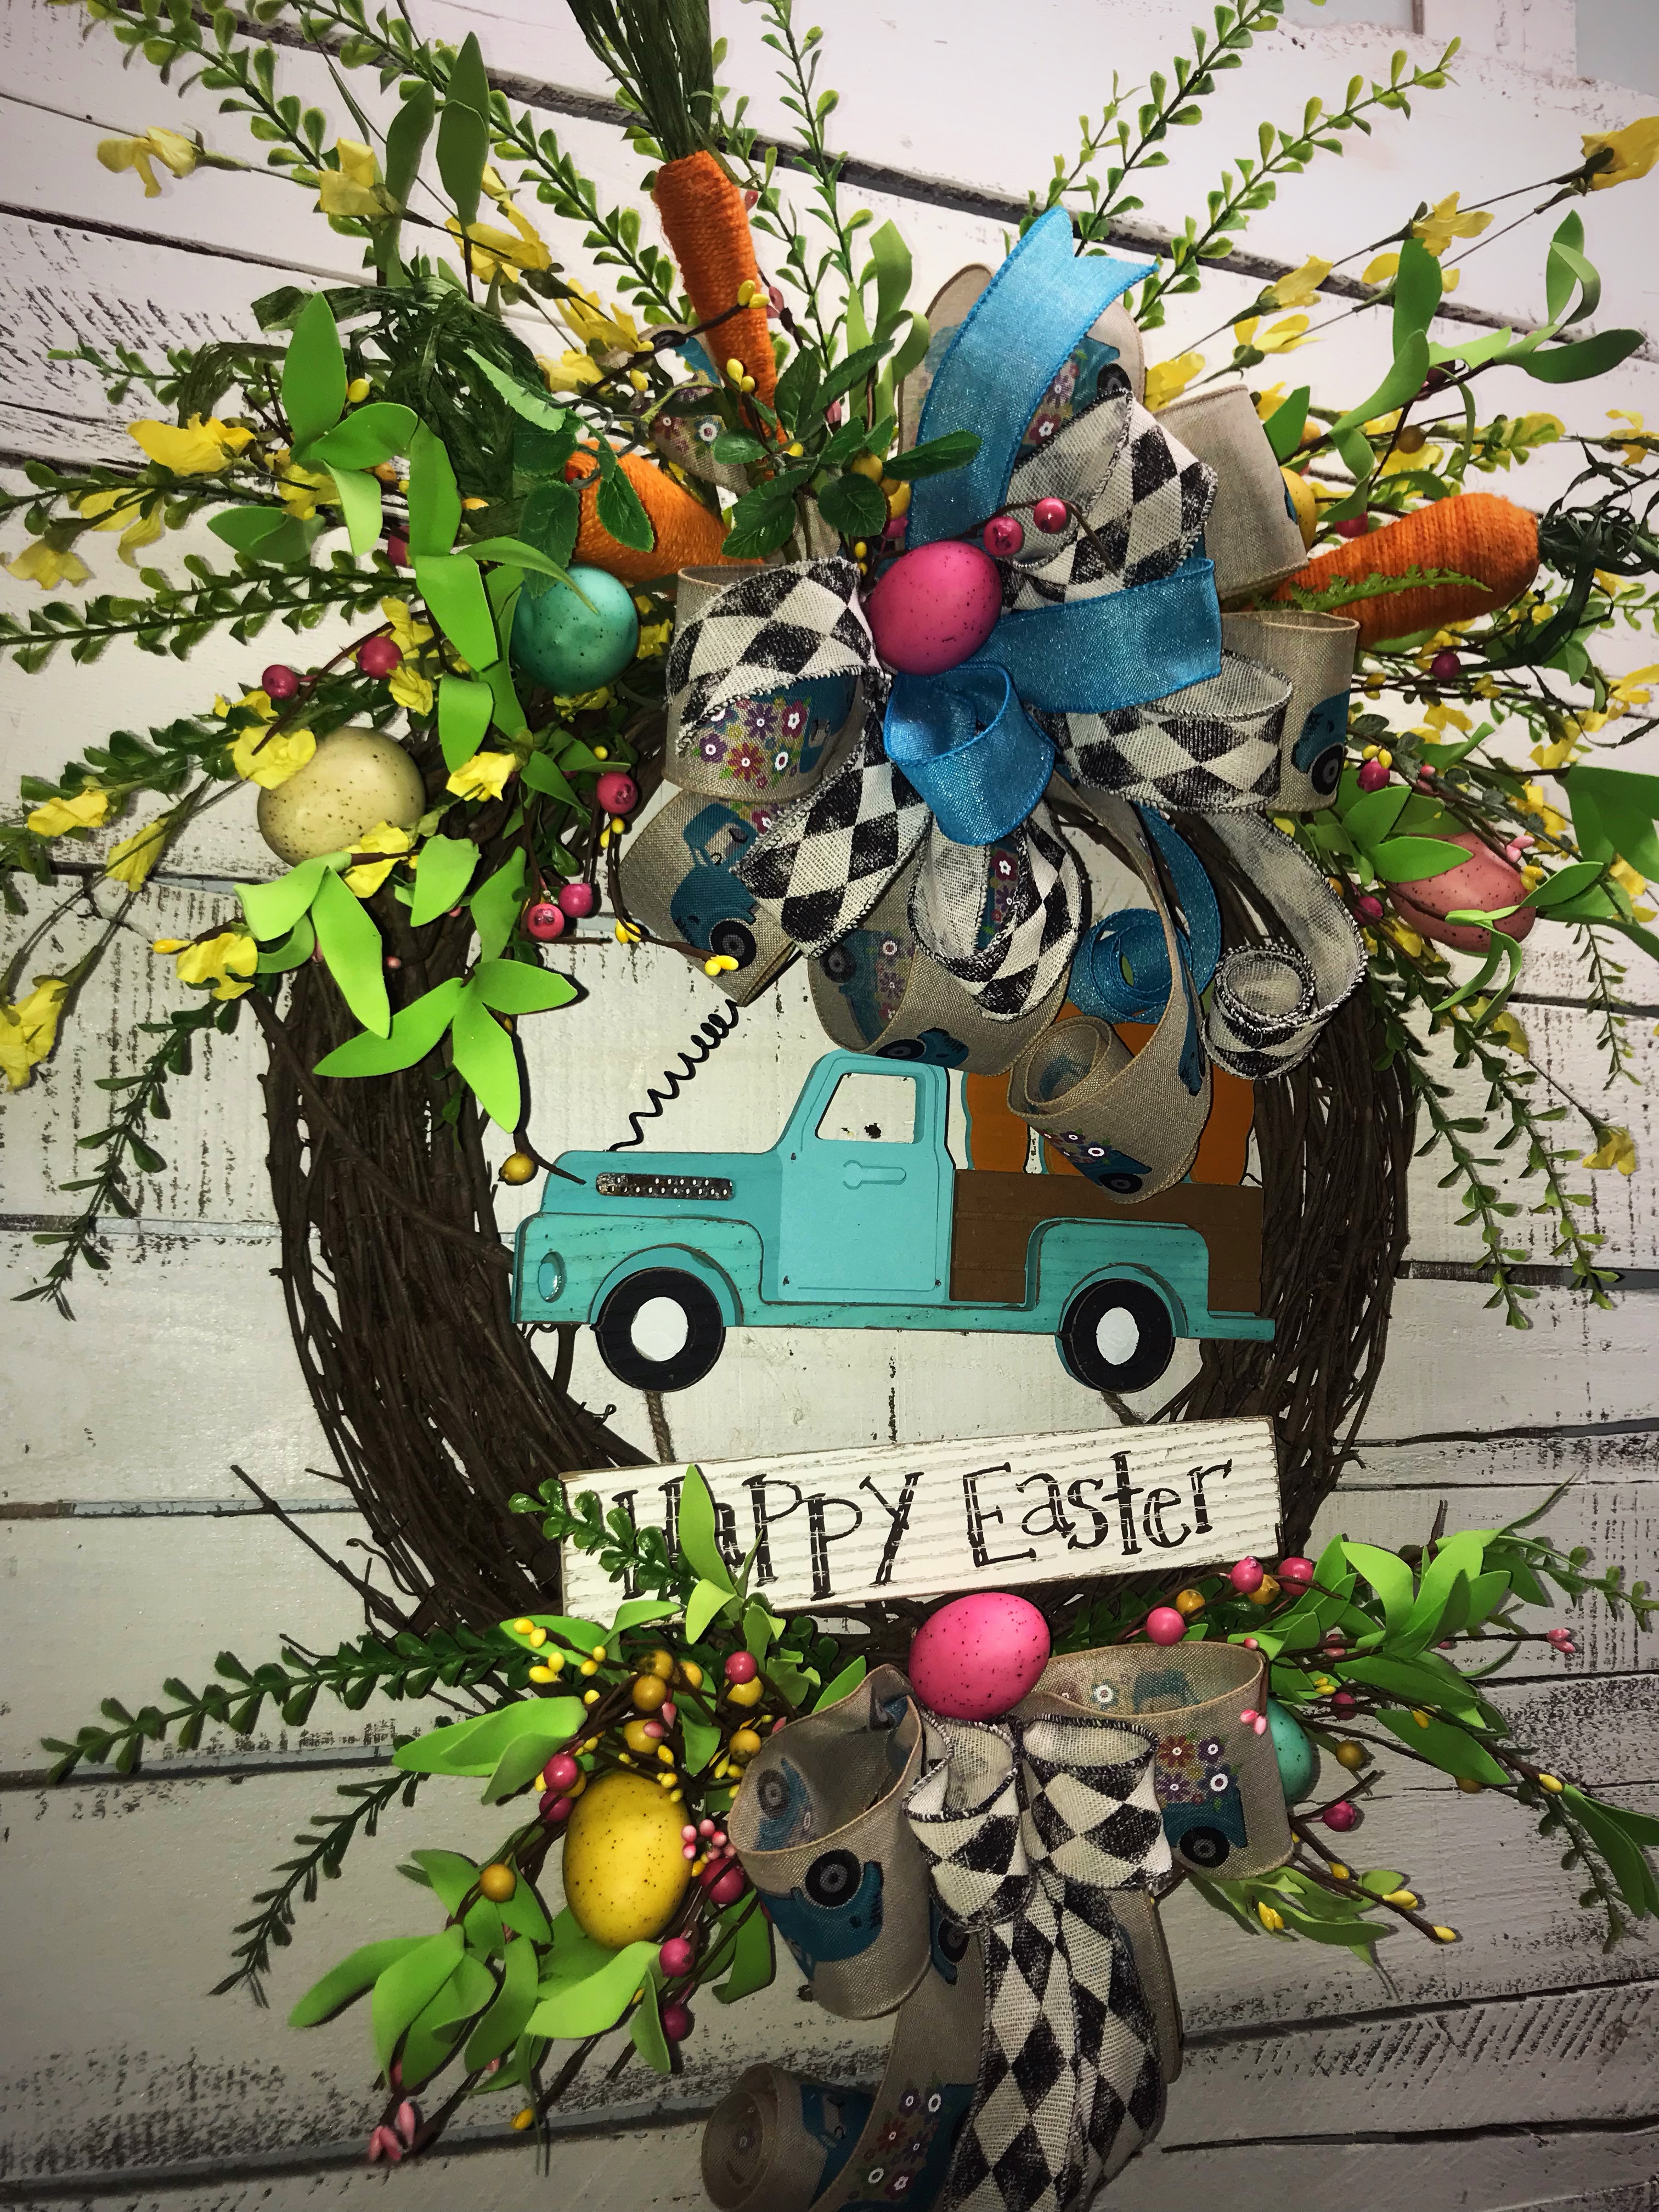 Download Easter Wreath, Old Pickup Truck, Truck Full of Carrots ...